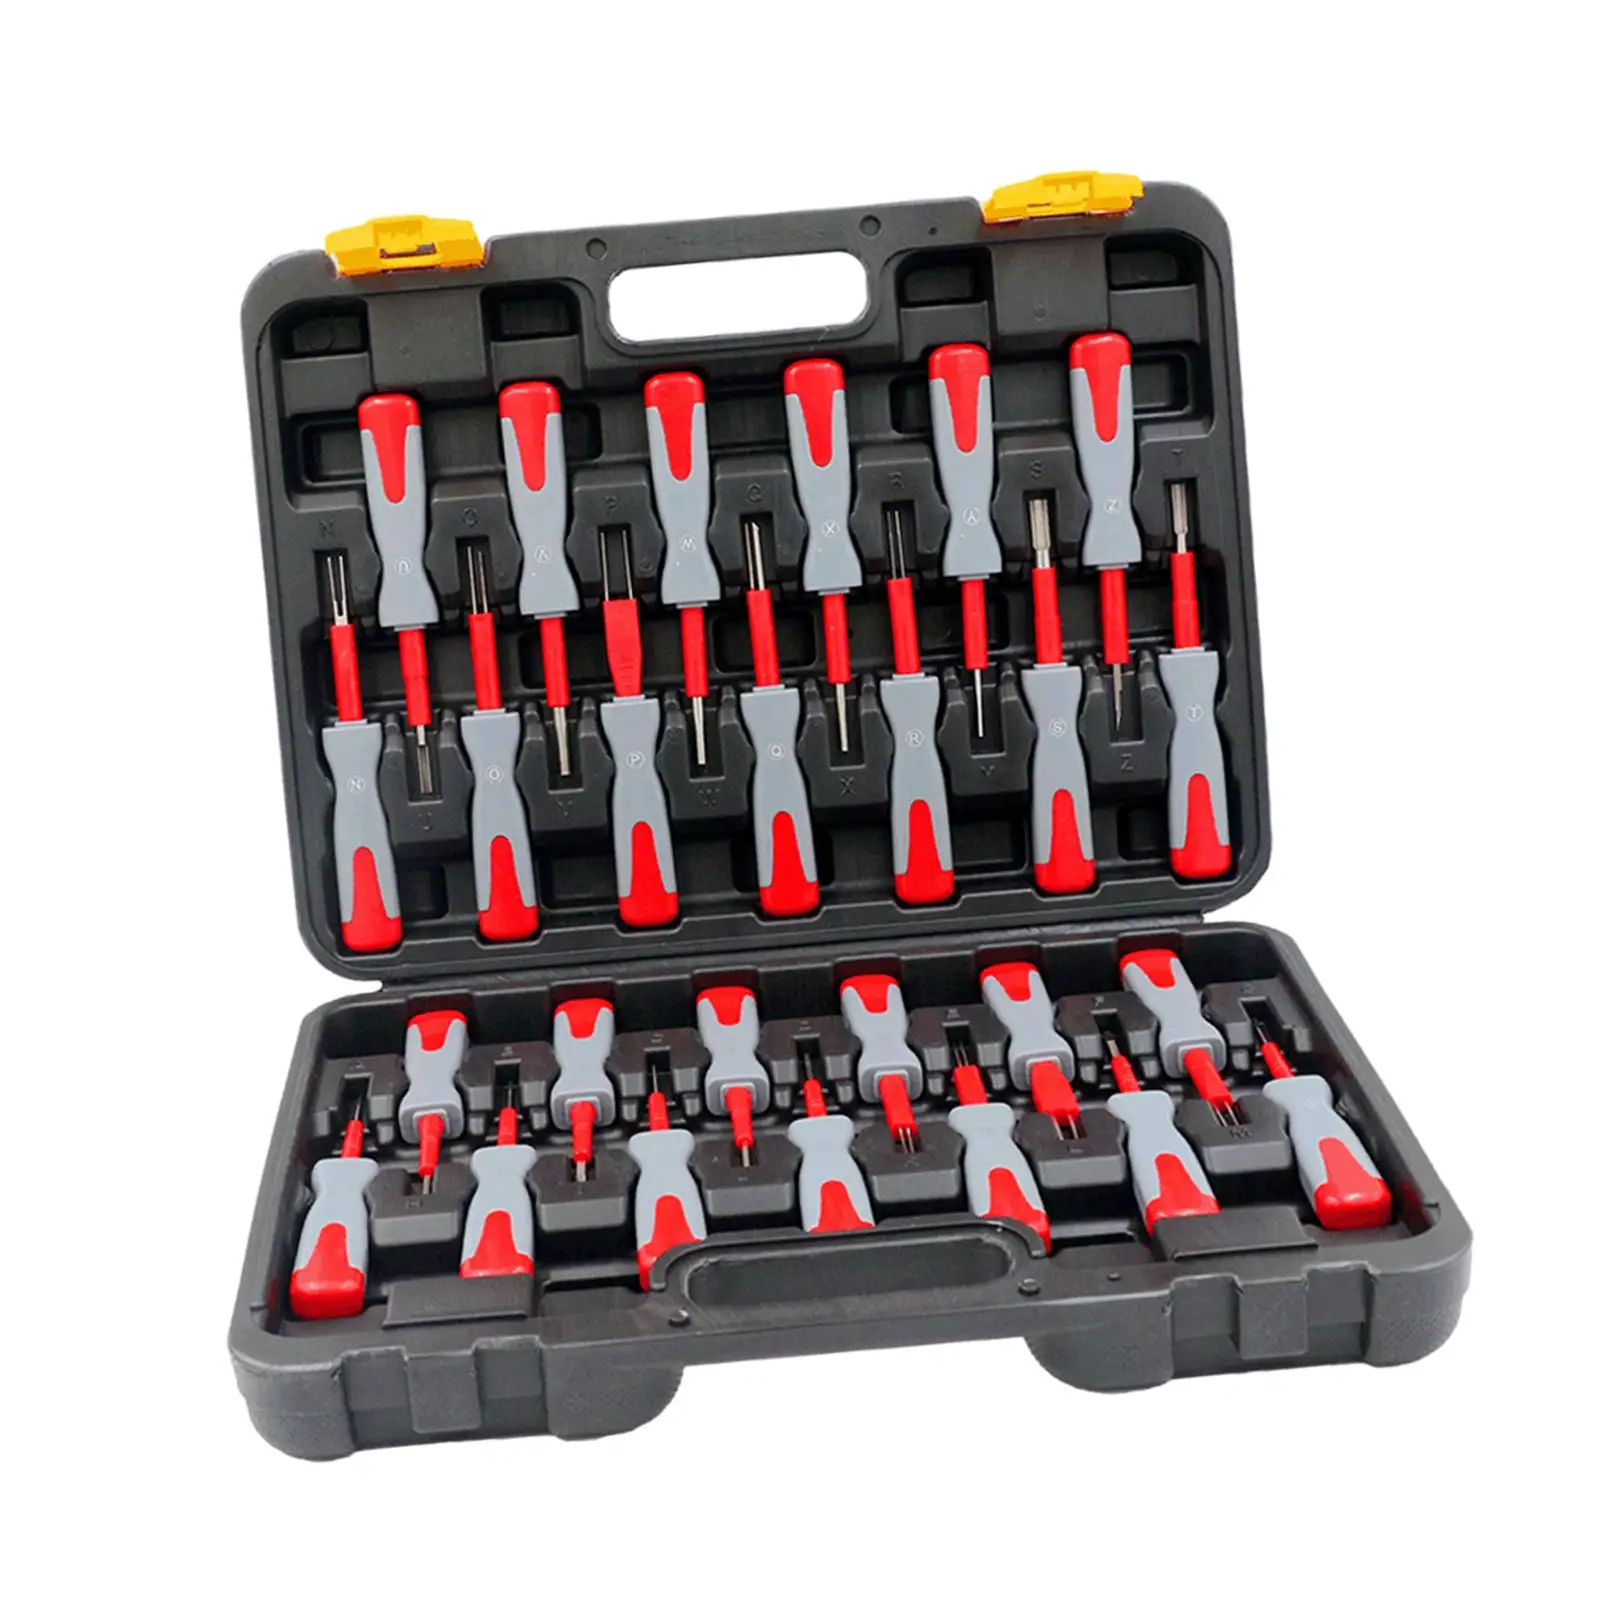 26x Car Terminal Removal Tool Kit Other Household Devices with Carrying Case